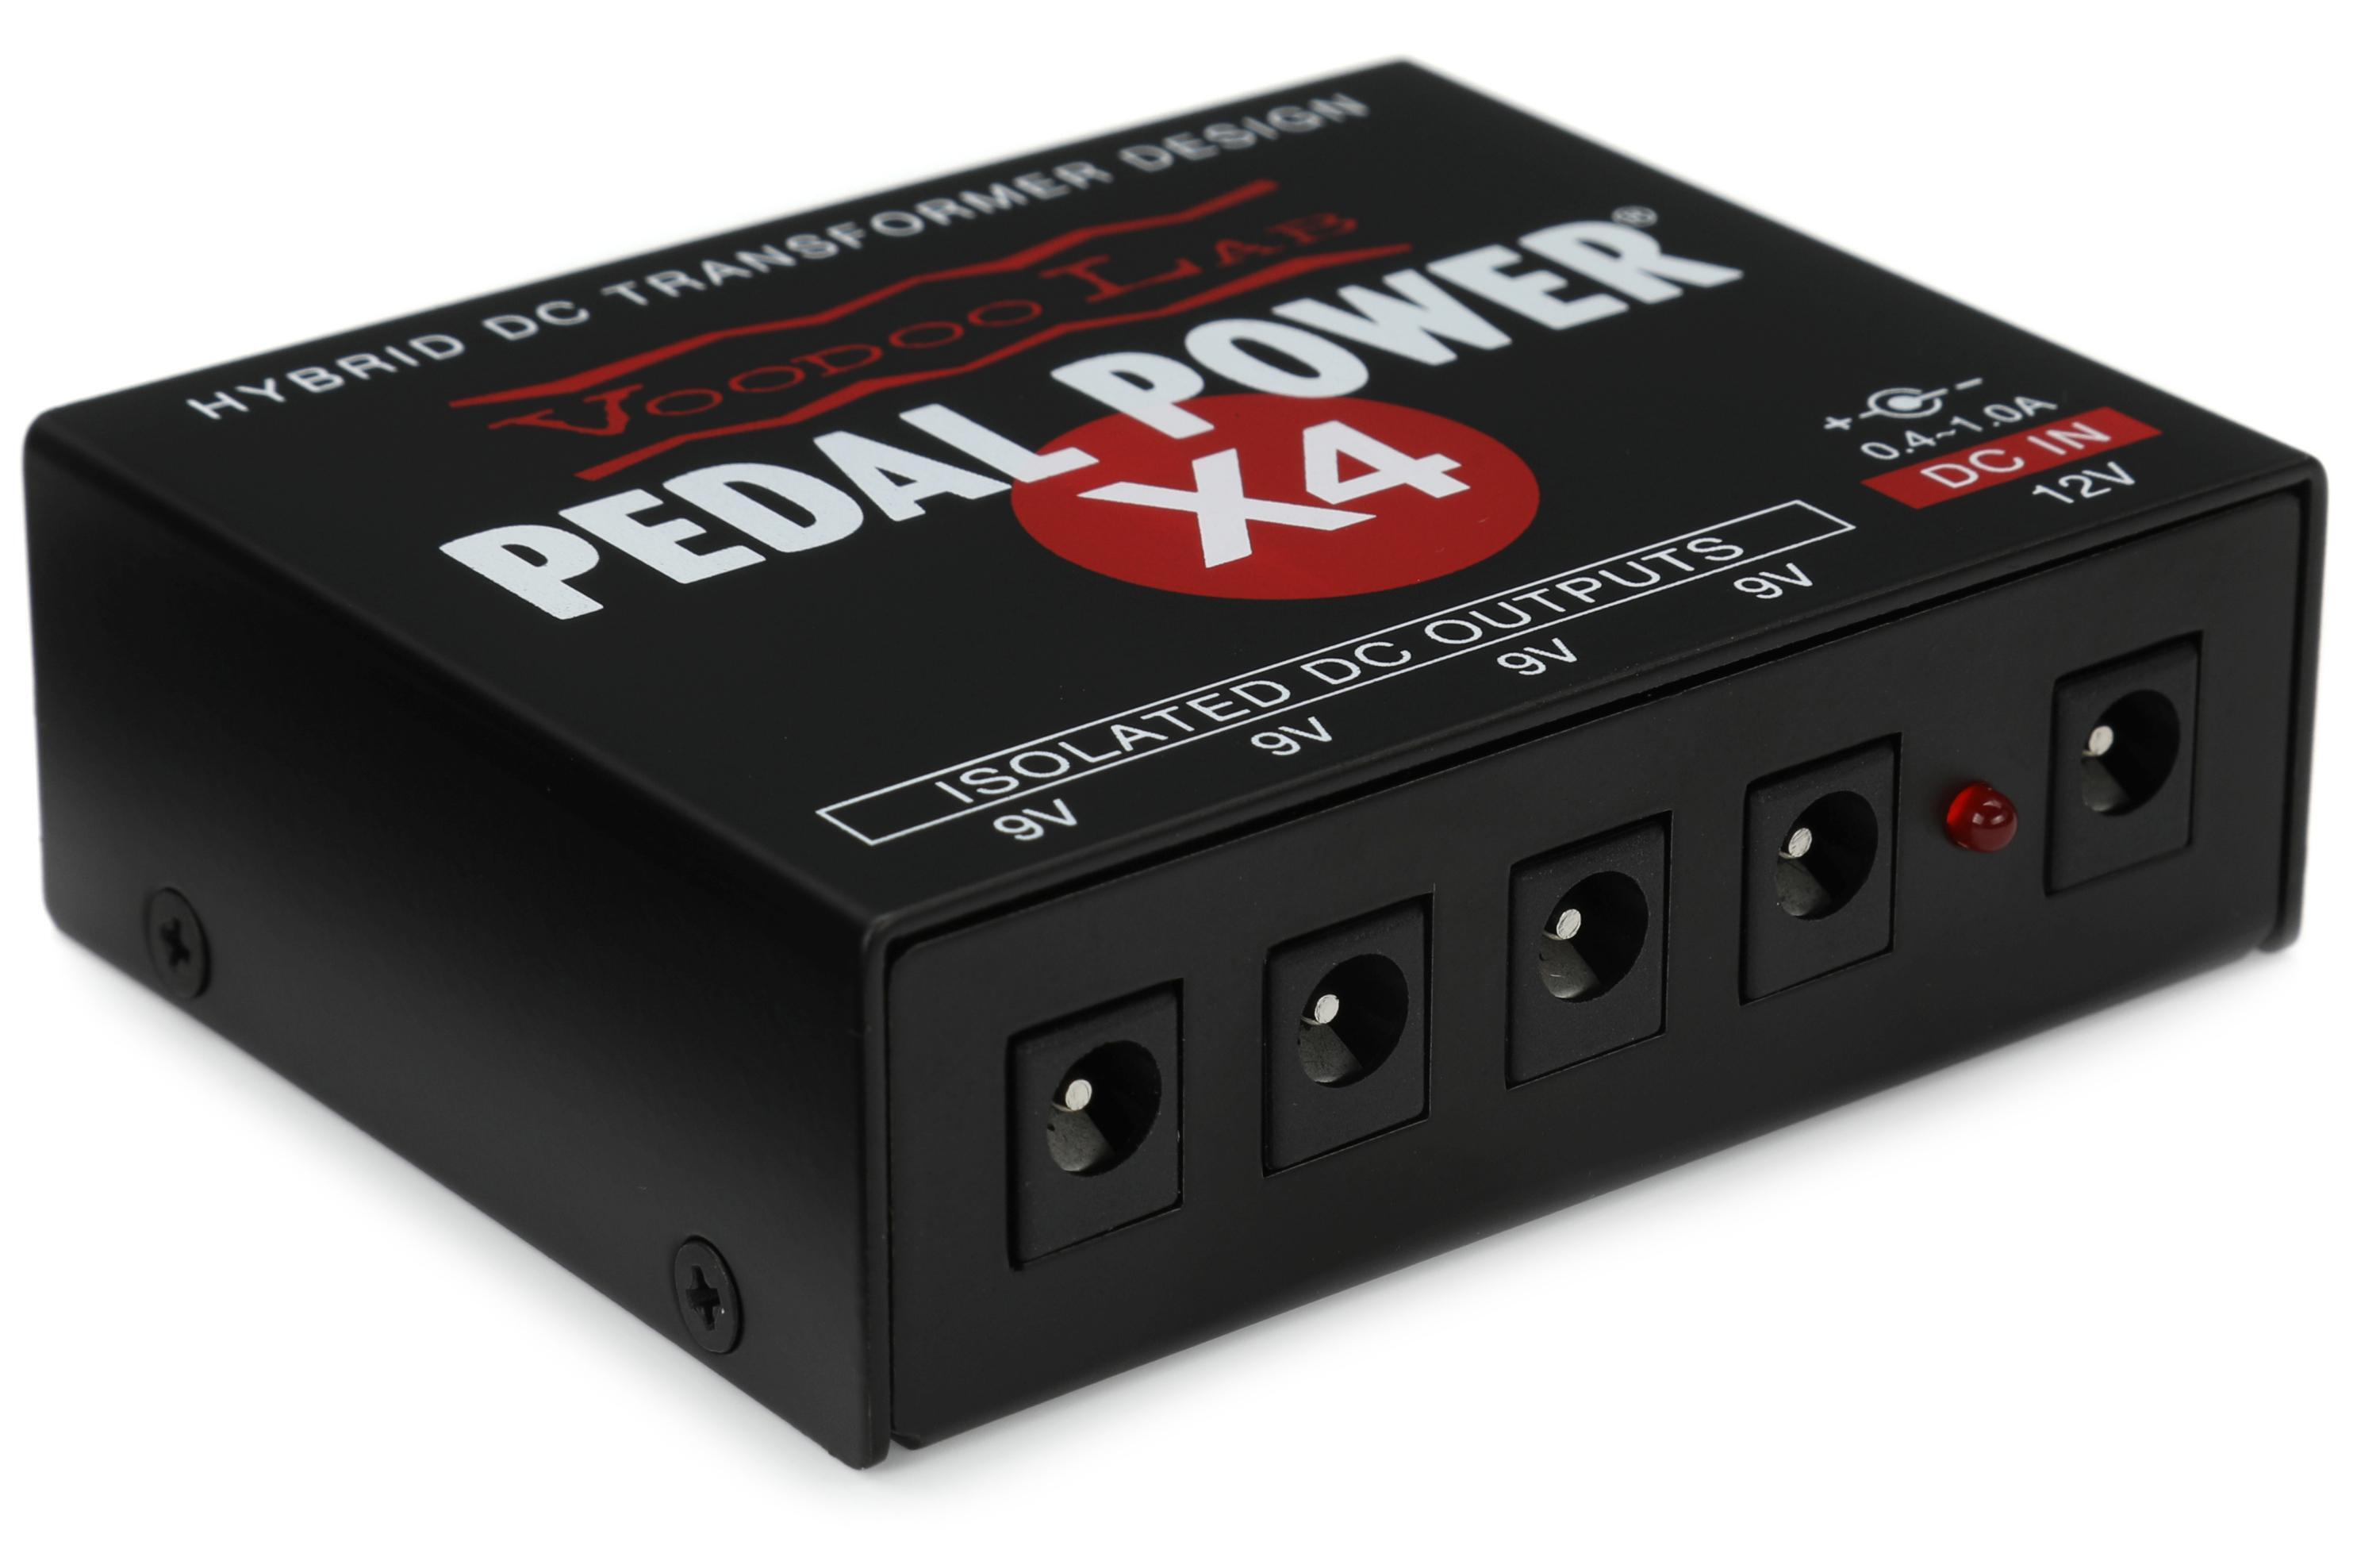 Bundled Item: Voodoo Lab Pedal Power X4 4-output Isolated Guitar Pedal Power Supply